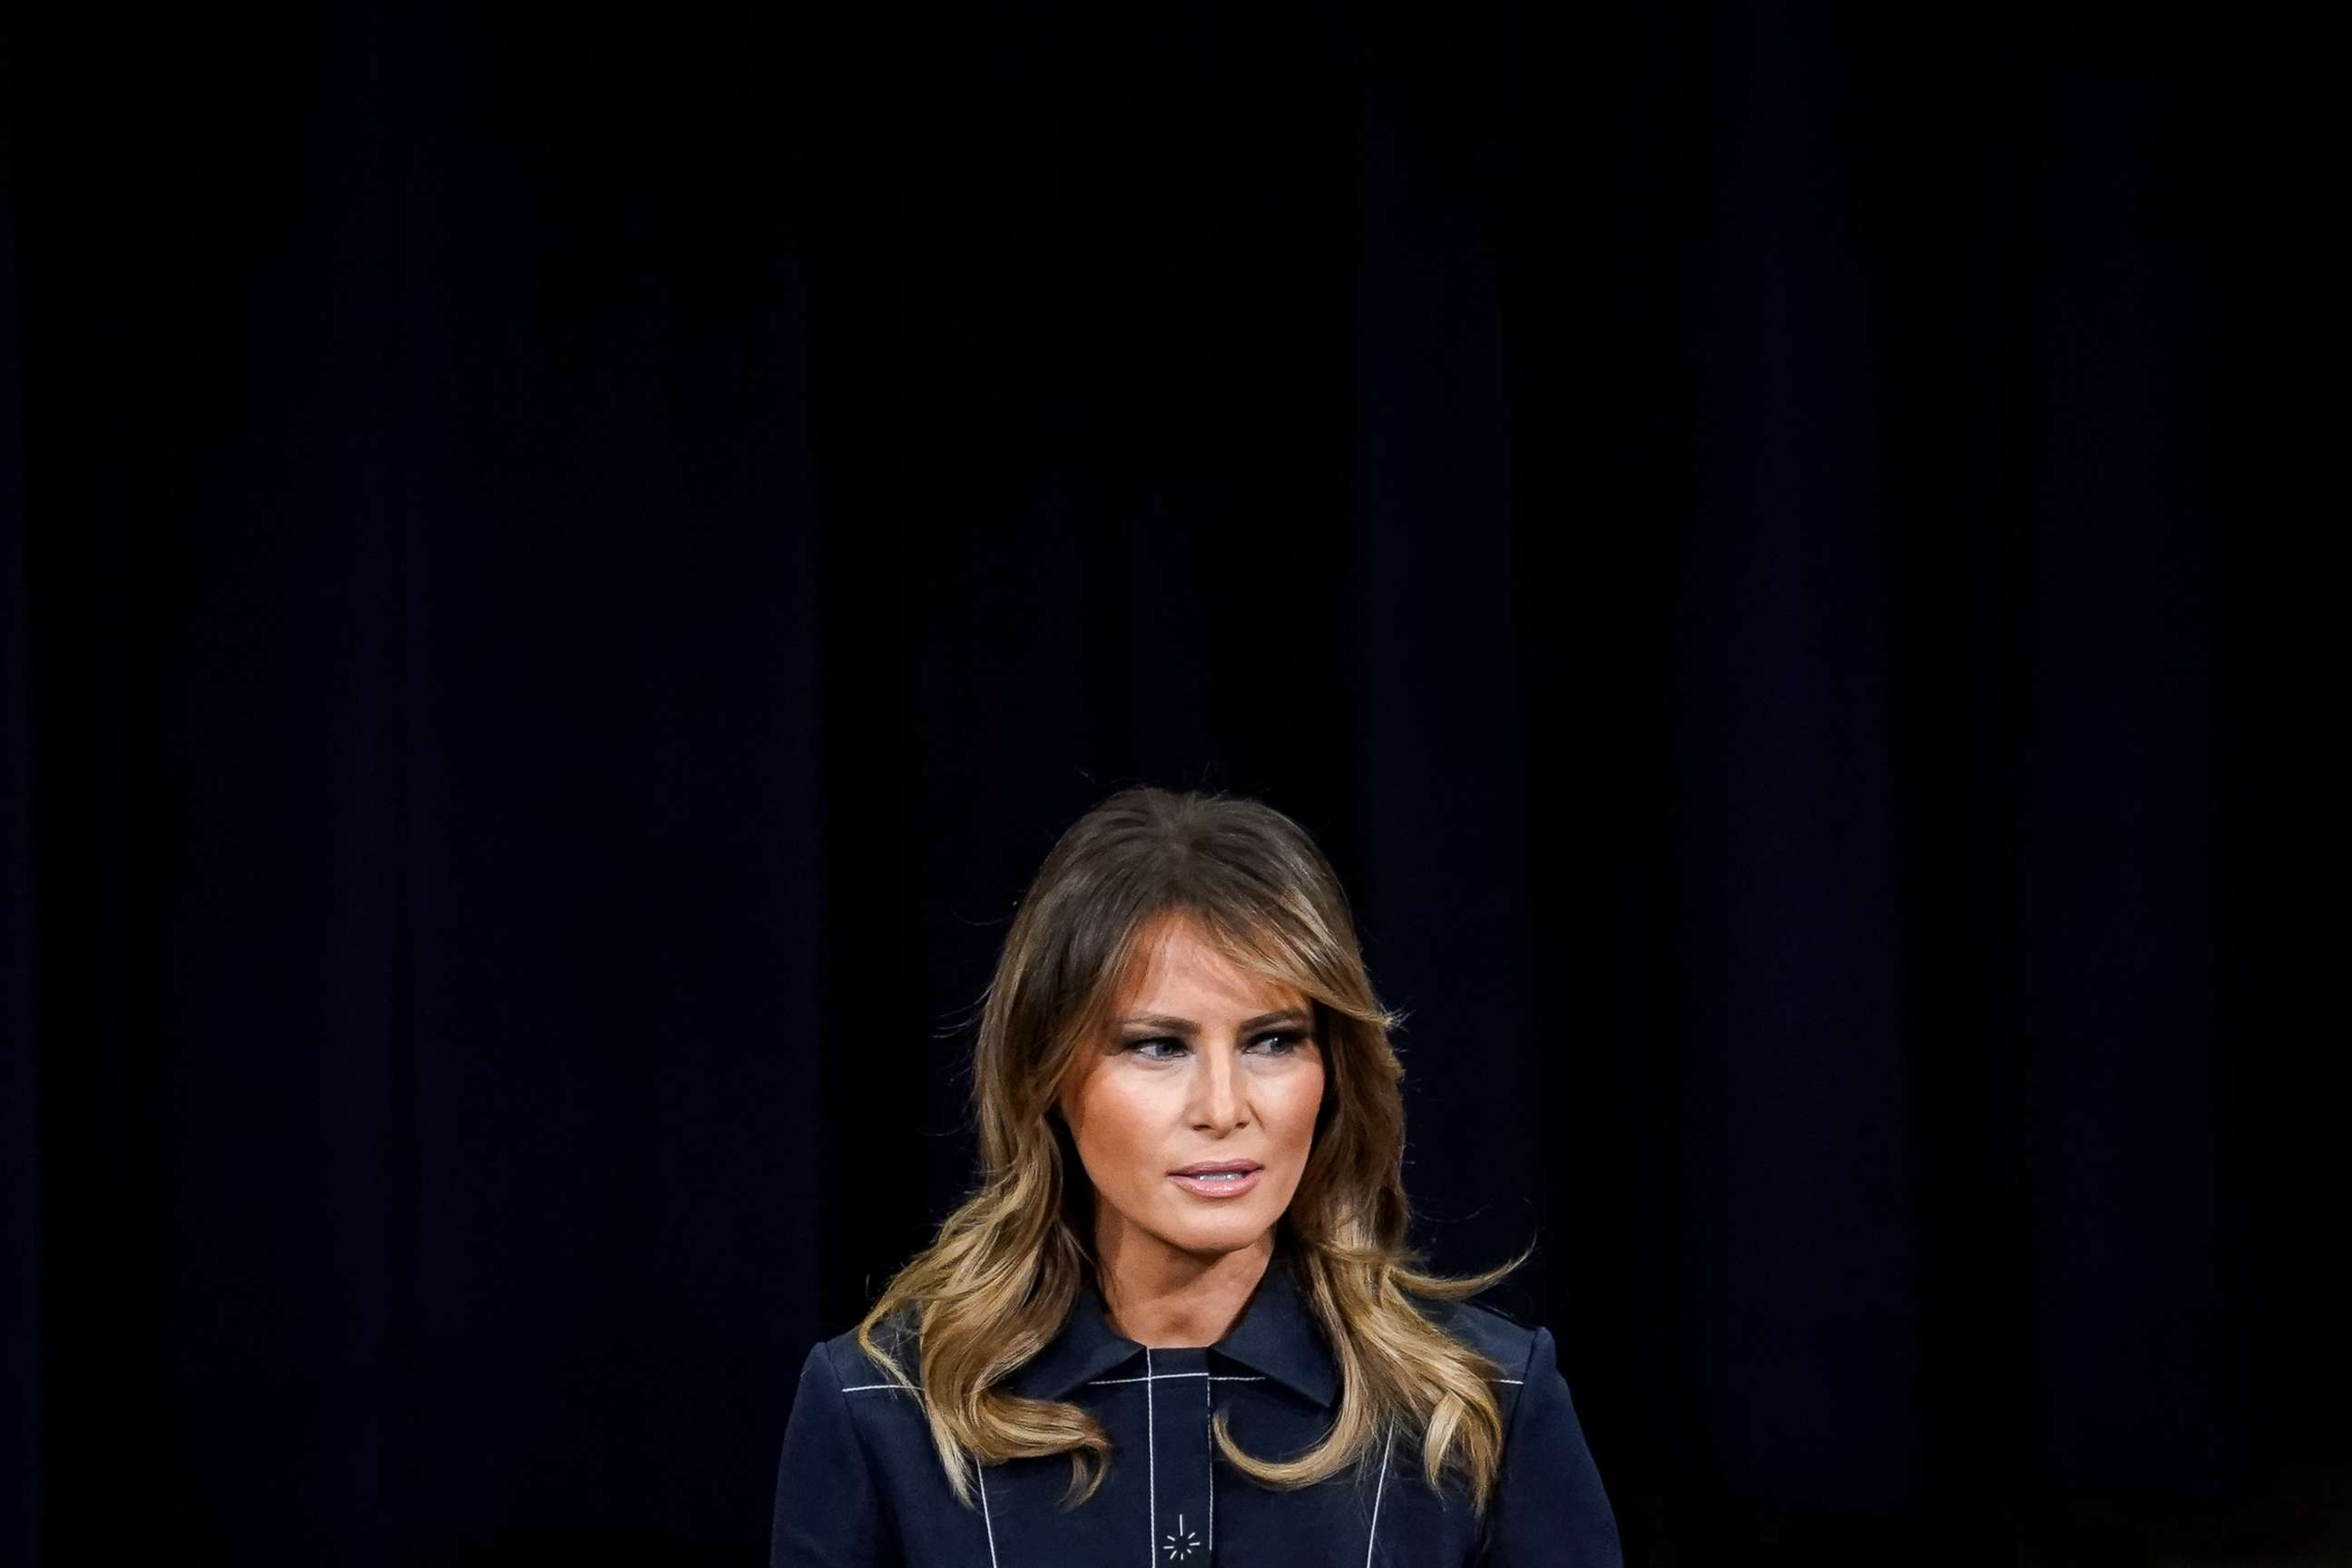 PHOTO: First Lady Melania Trump speaks during an event at the Department of Justice on March 6, 2020 in Washington.